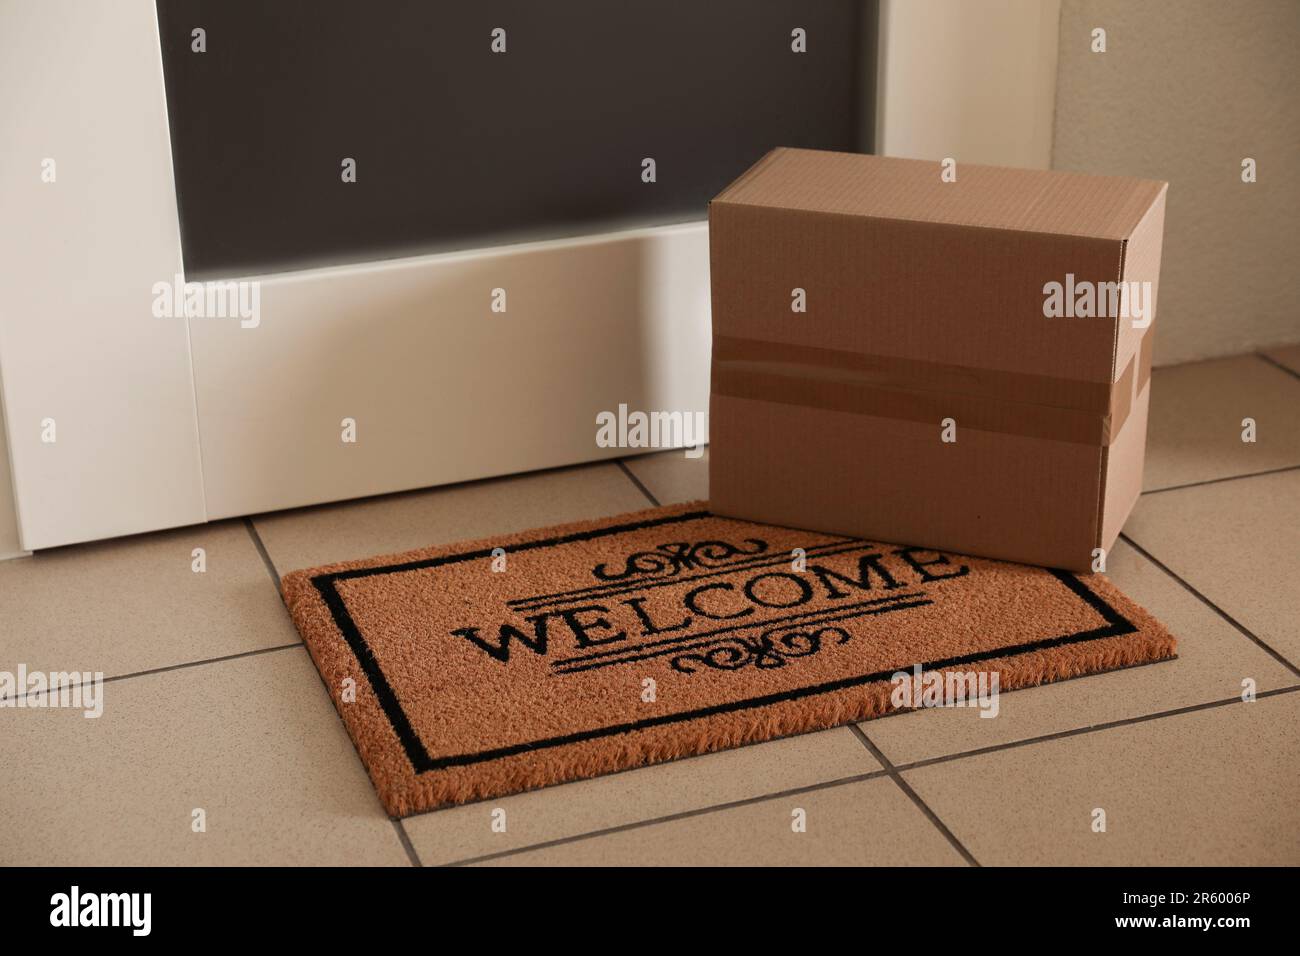 Parcel delivered on mat near front door Stock Photo